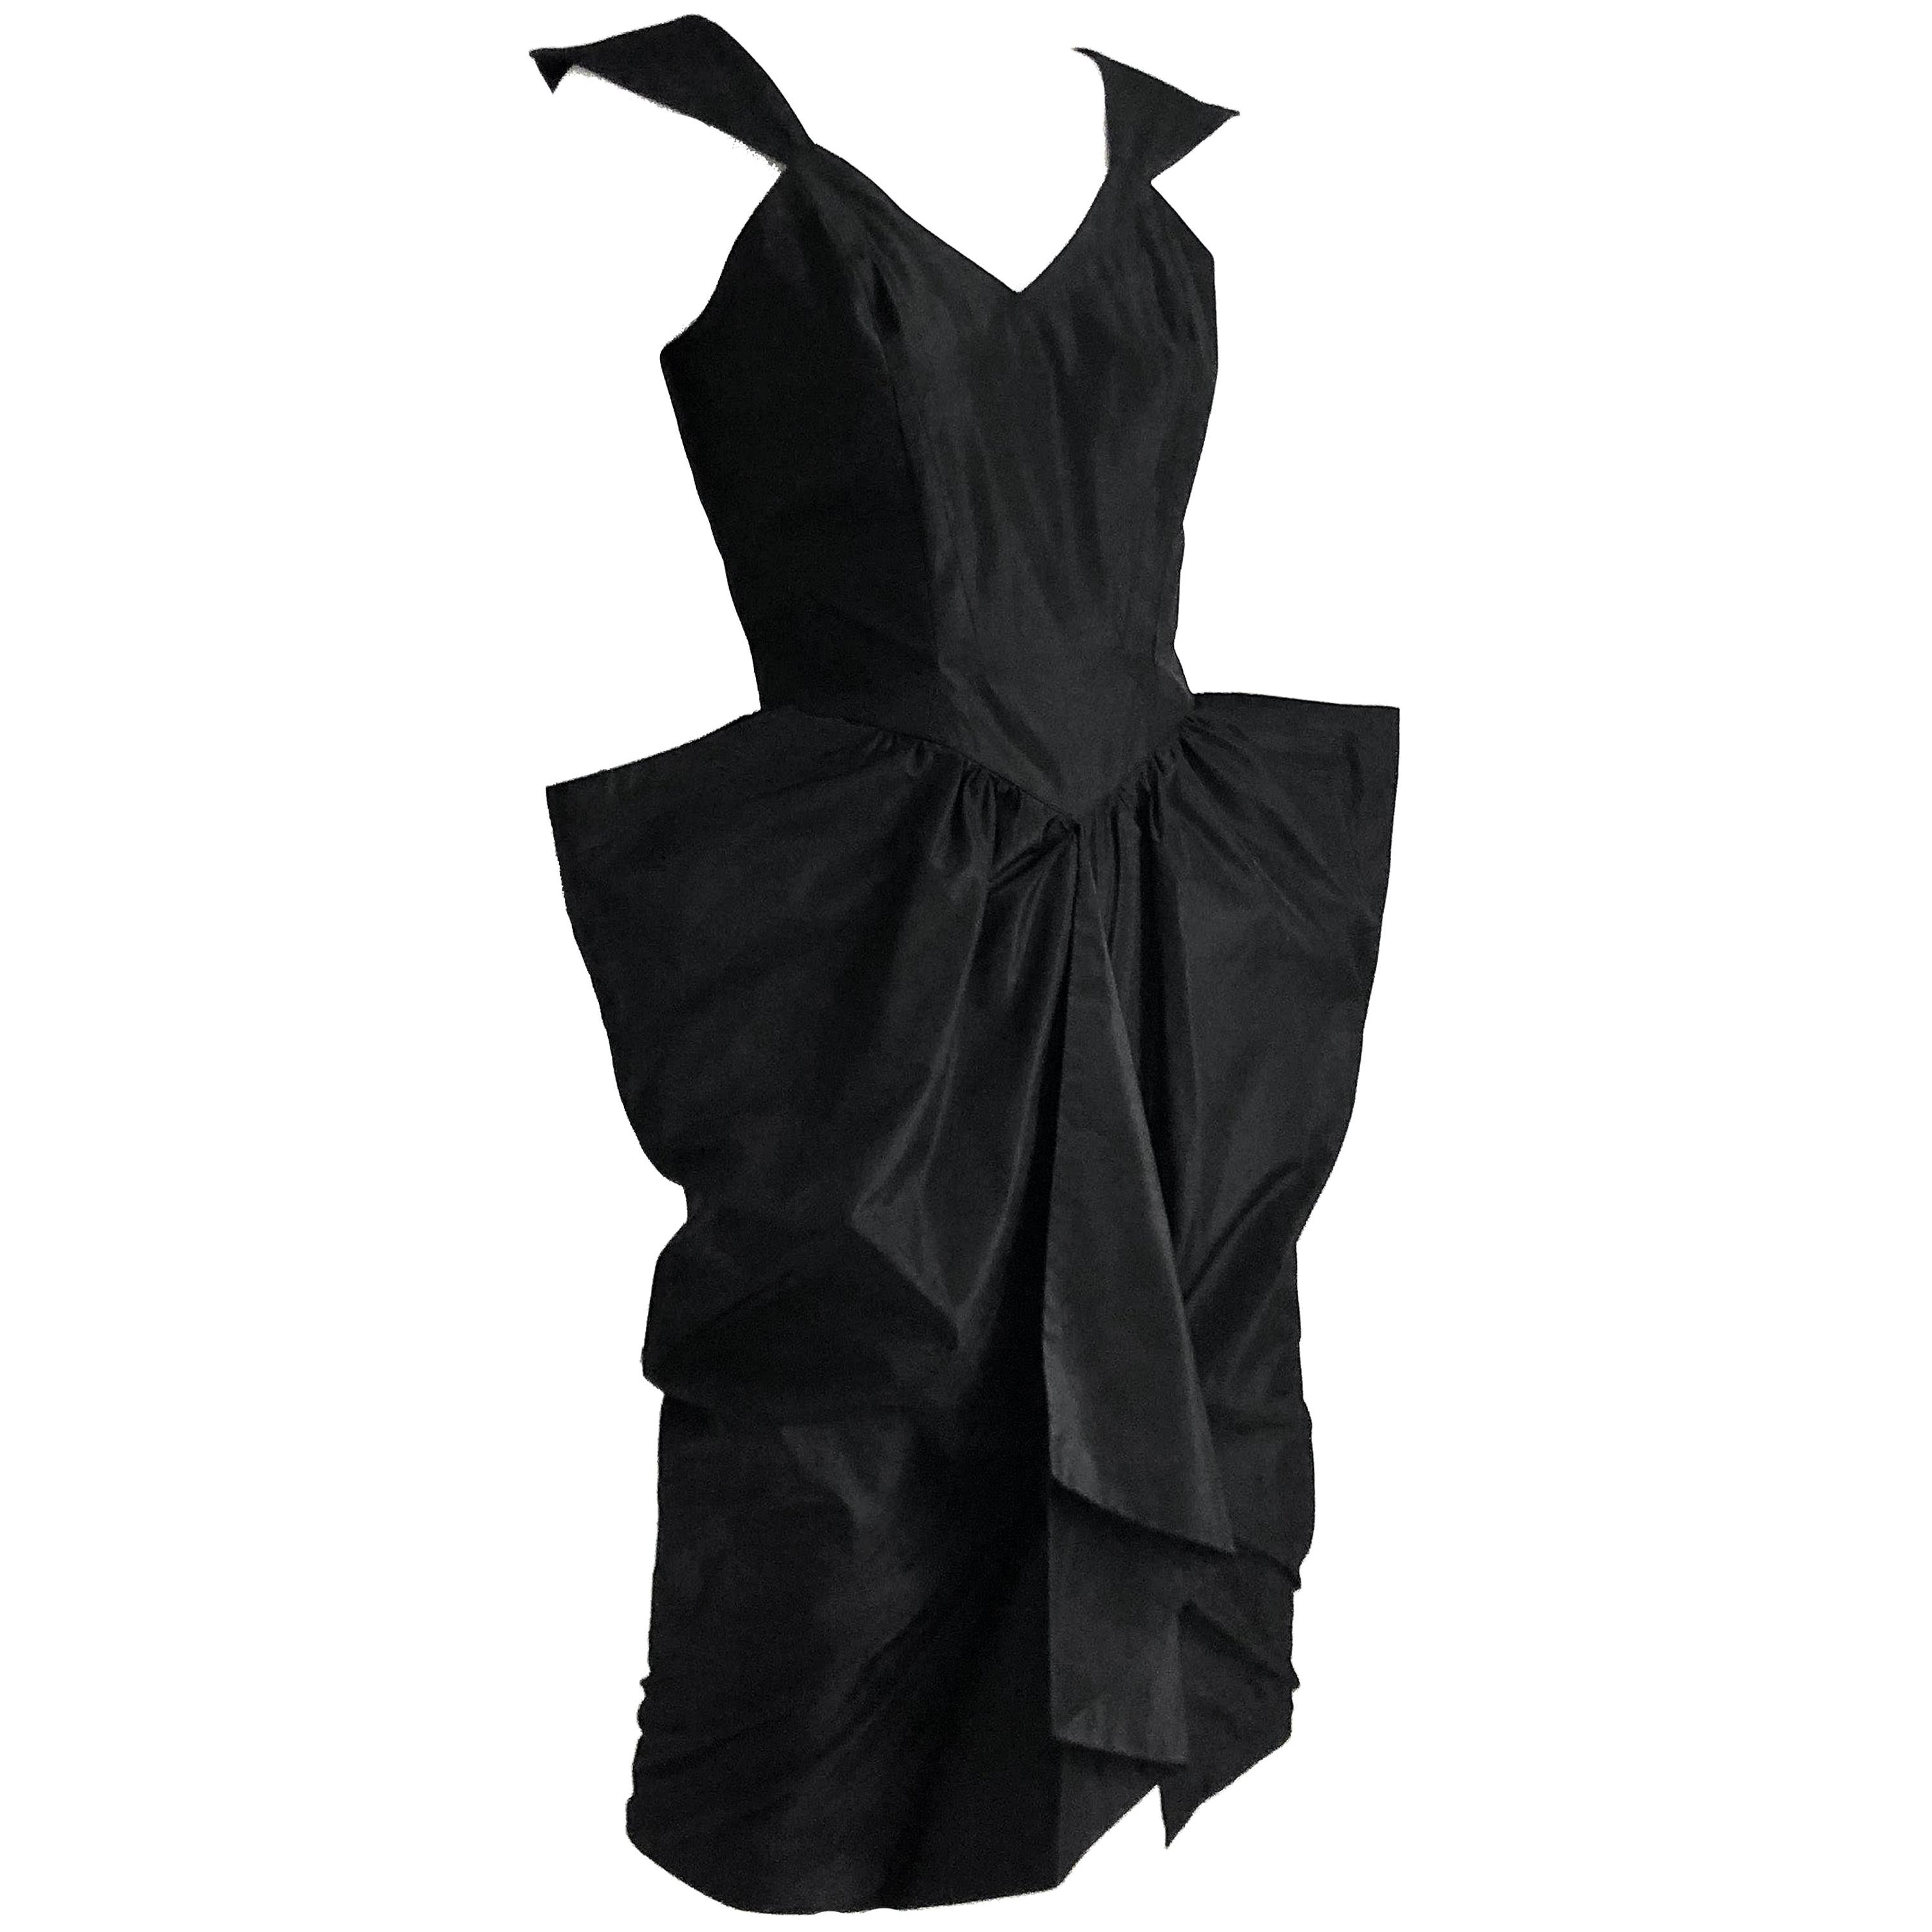 Vintage Thierry Mugler sculptural little black dress from the 90s.  Timeless sihouette. Fully-lined, made from taffeta, fastens with rear zipper/hook & loop.  Fitted bodice with pointed cap sleeves and front skirt vent with incredible sculptural hip